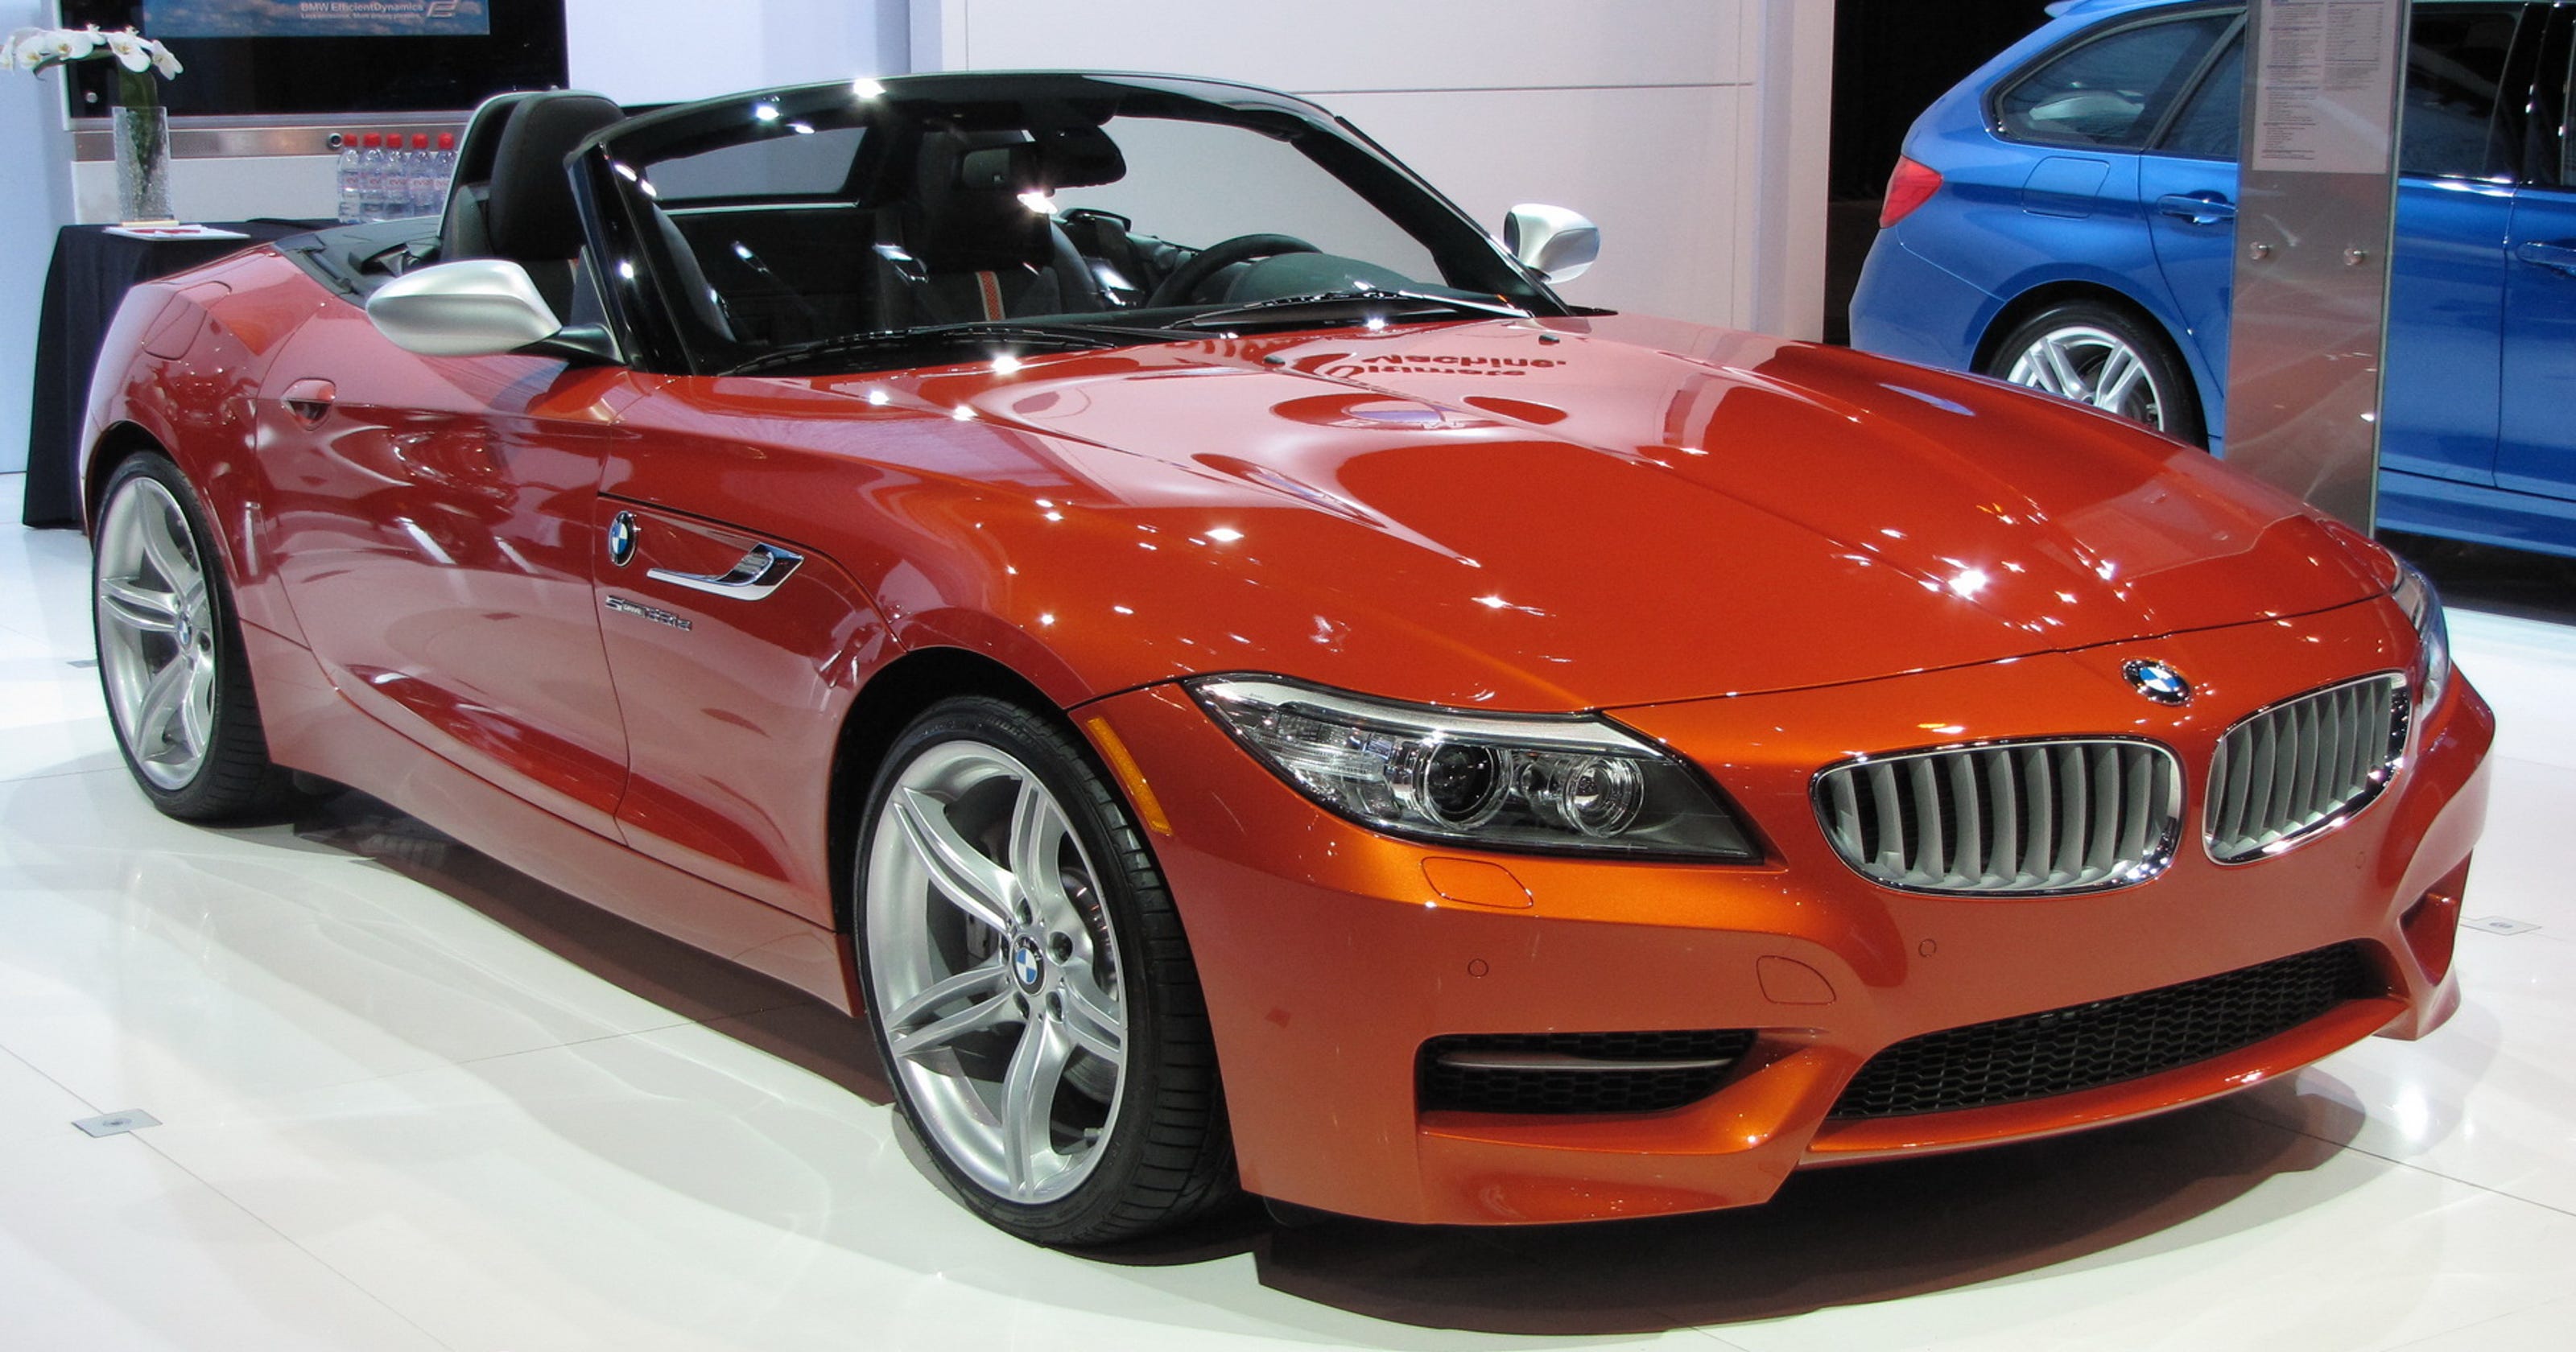 2017 BMW Z4 Roadster is both classic & contemporary